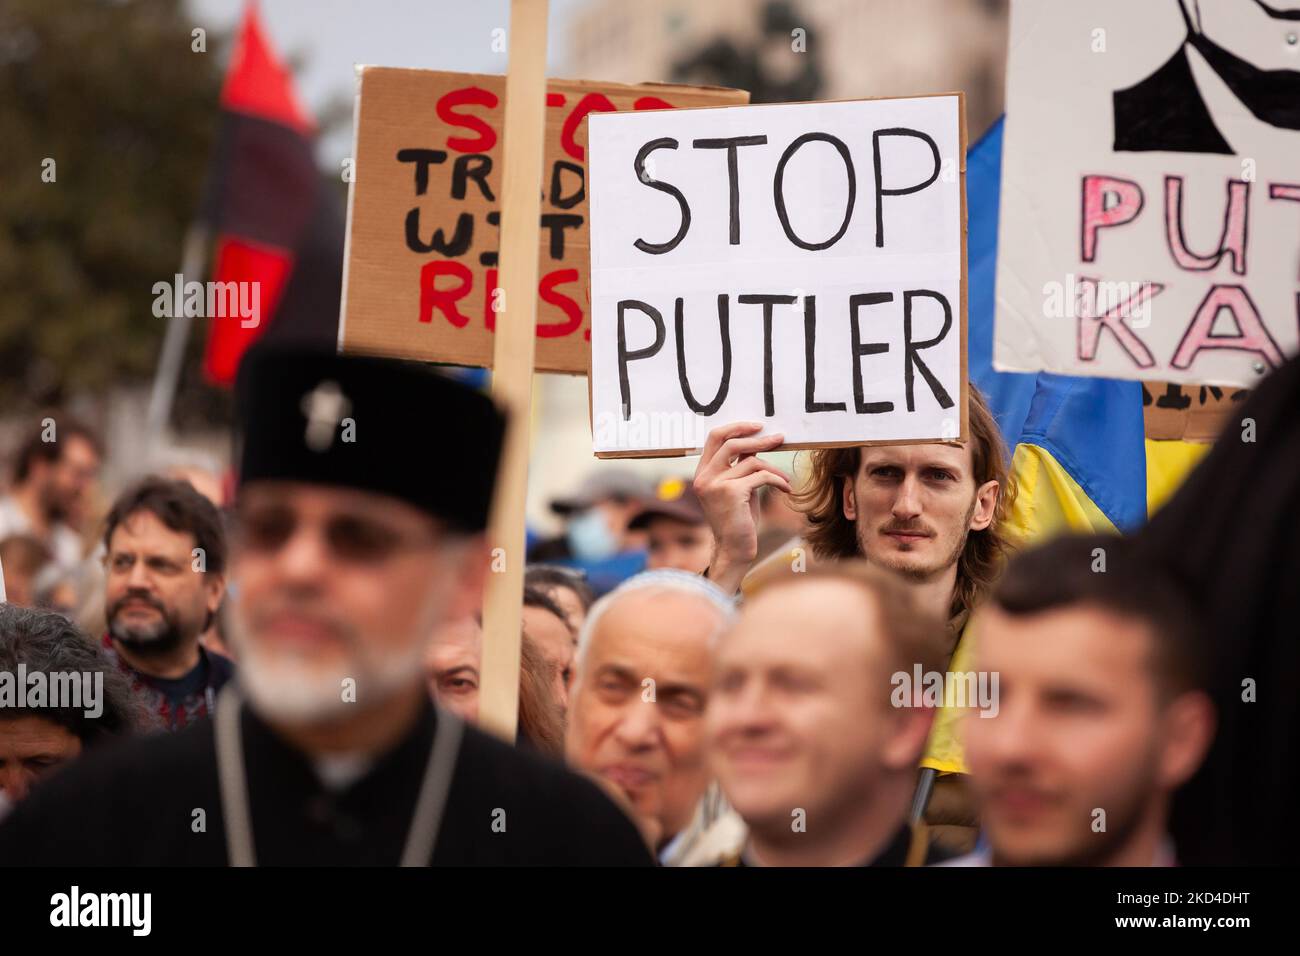 A protester holds a sign equating Russian President Vladimir Putin with Adlof Hitler during a rally for Ukraine at the White House. There have been many signs like this one, combining the names of Putin and Hitler, over the last 10 days of protests, Thousands of people from across the United States gathered to thank the US and other countries for their help, and to demand a no-fly zone and other assistance for Ukraine. The event was sponsored by United Help Ukraine and the Ukranian Congress Committee of America, both U.S.-based assistance and advocacy organizations. (Photo by Allison Bailey/Nu Stock Photo